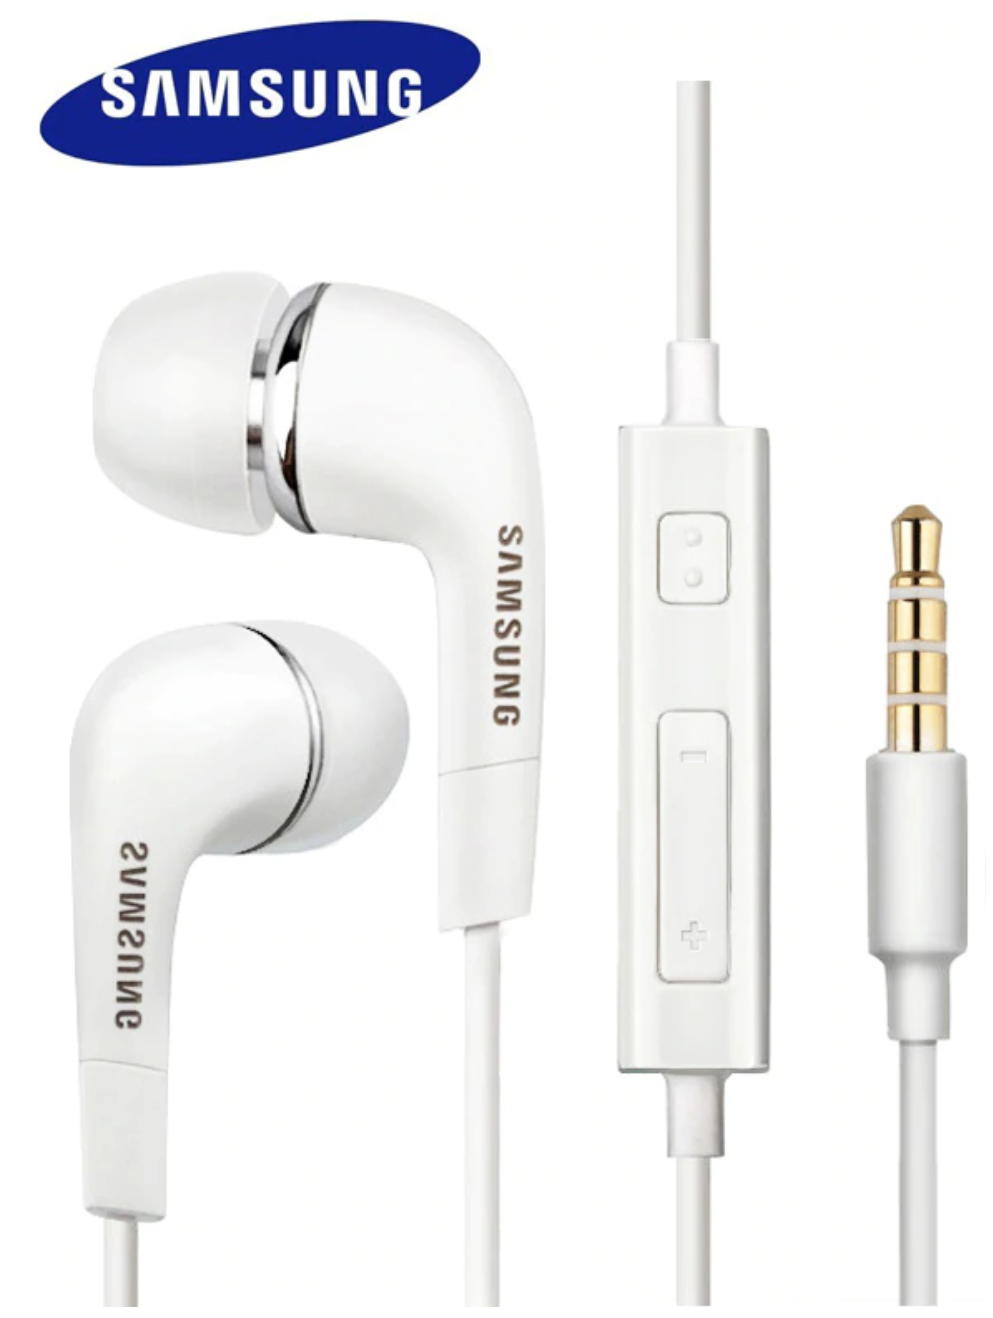 Samsung 3.5mm Plug Stereo earphone with built-in Mic